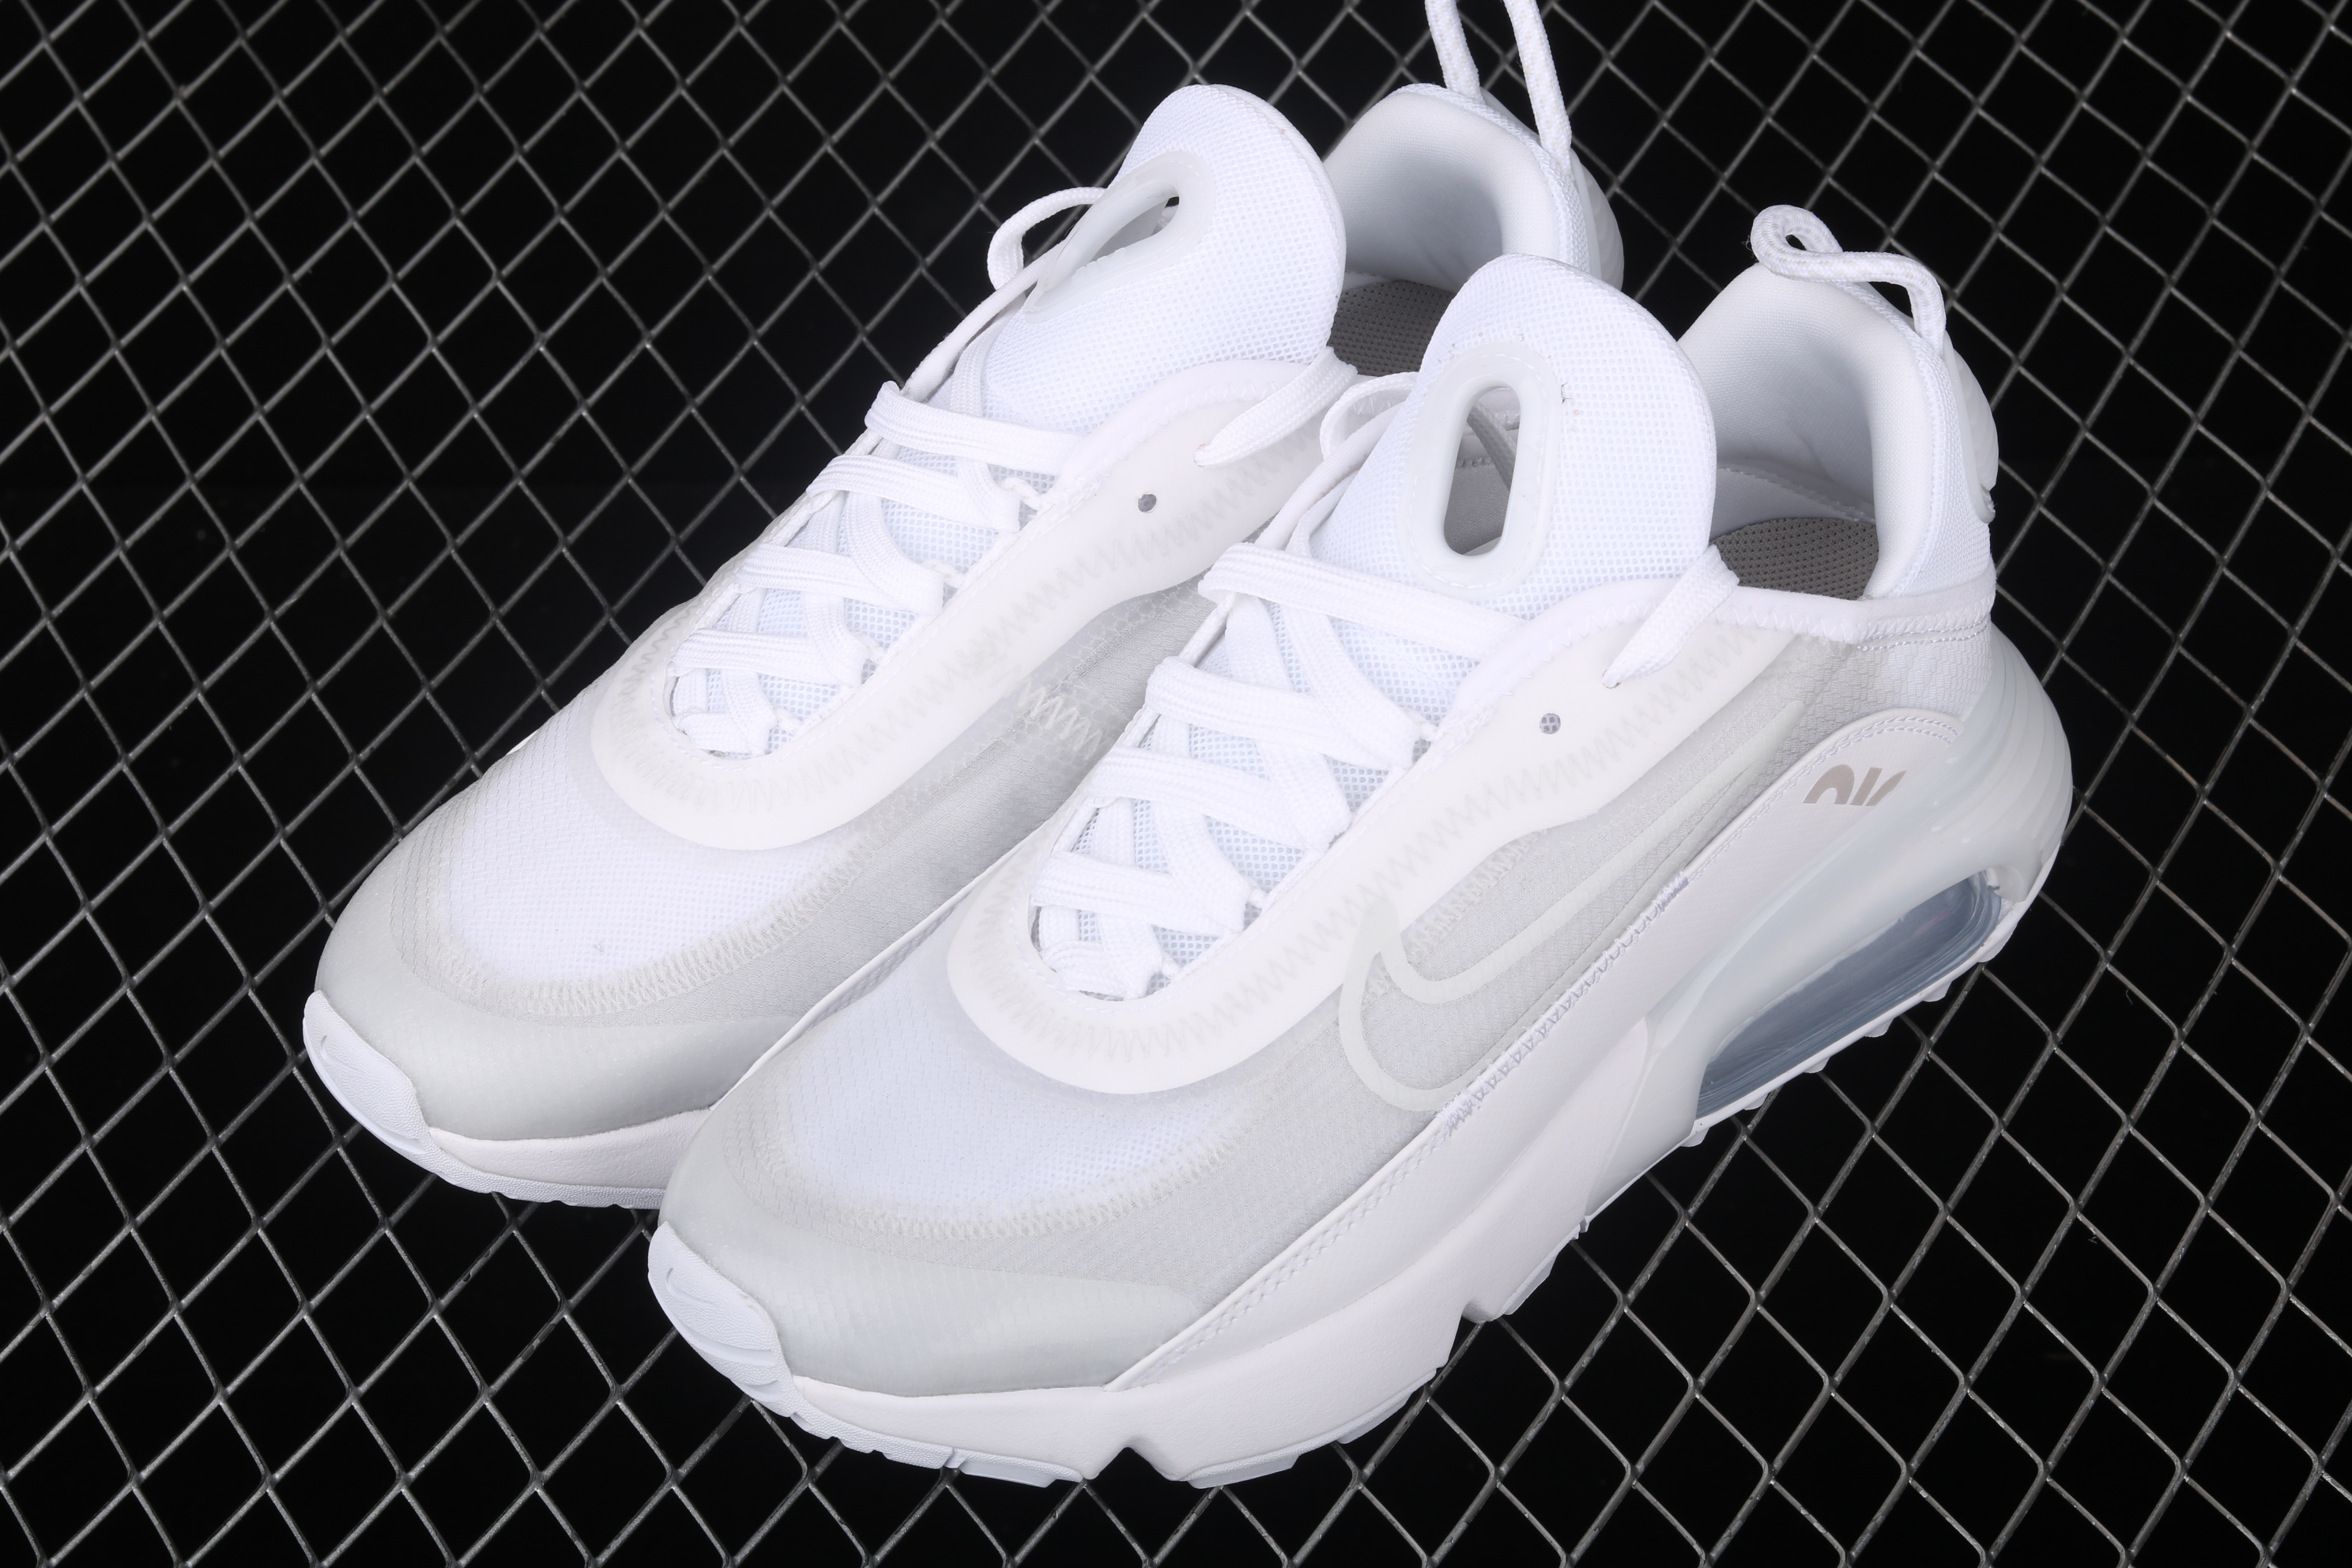 New Nike Air Max 2090 Pure White Running Shoes For Women